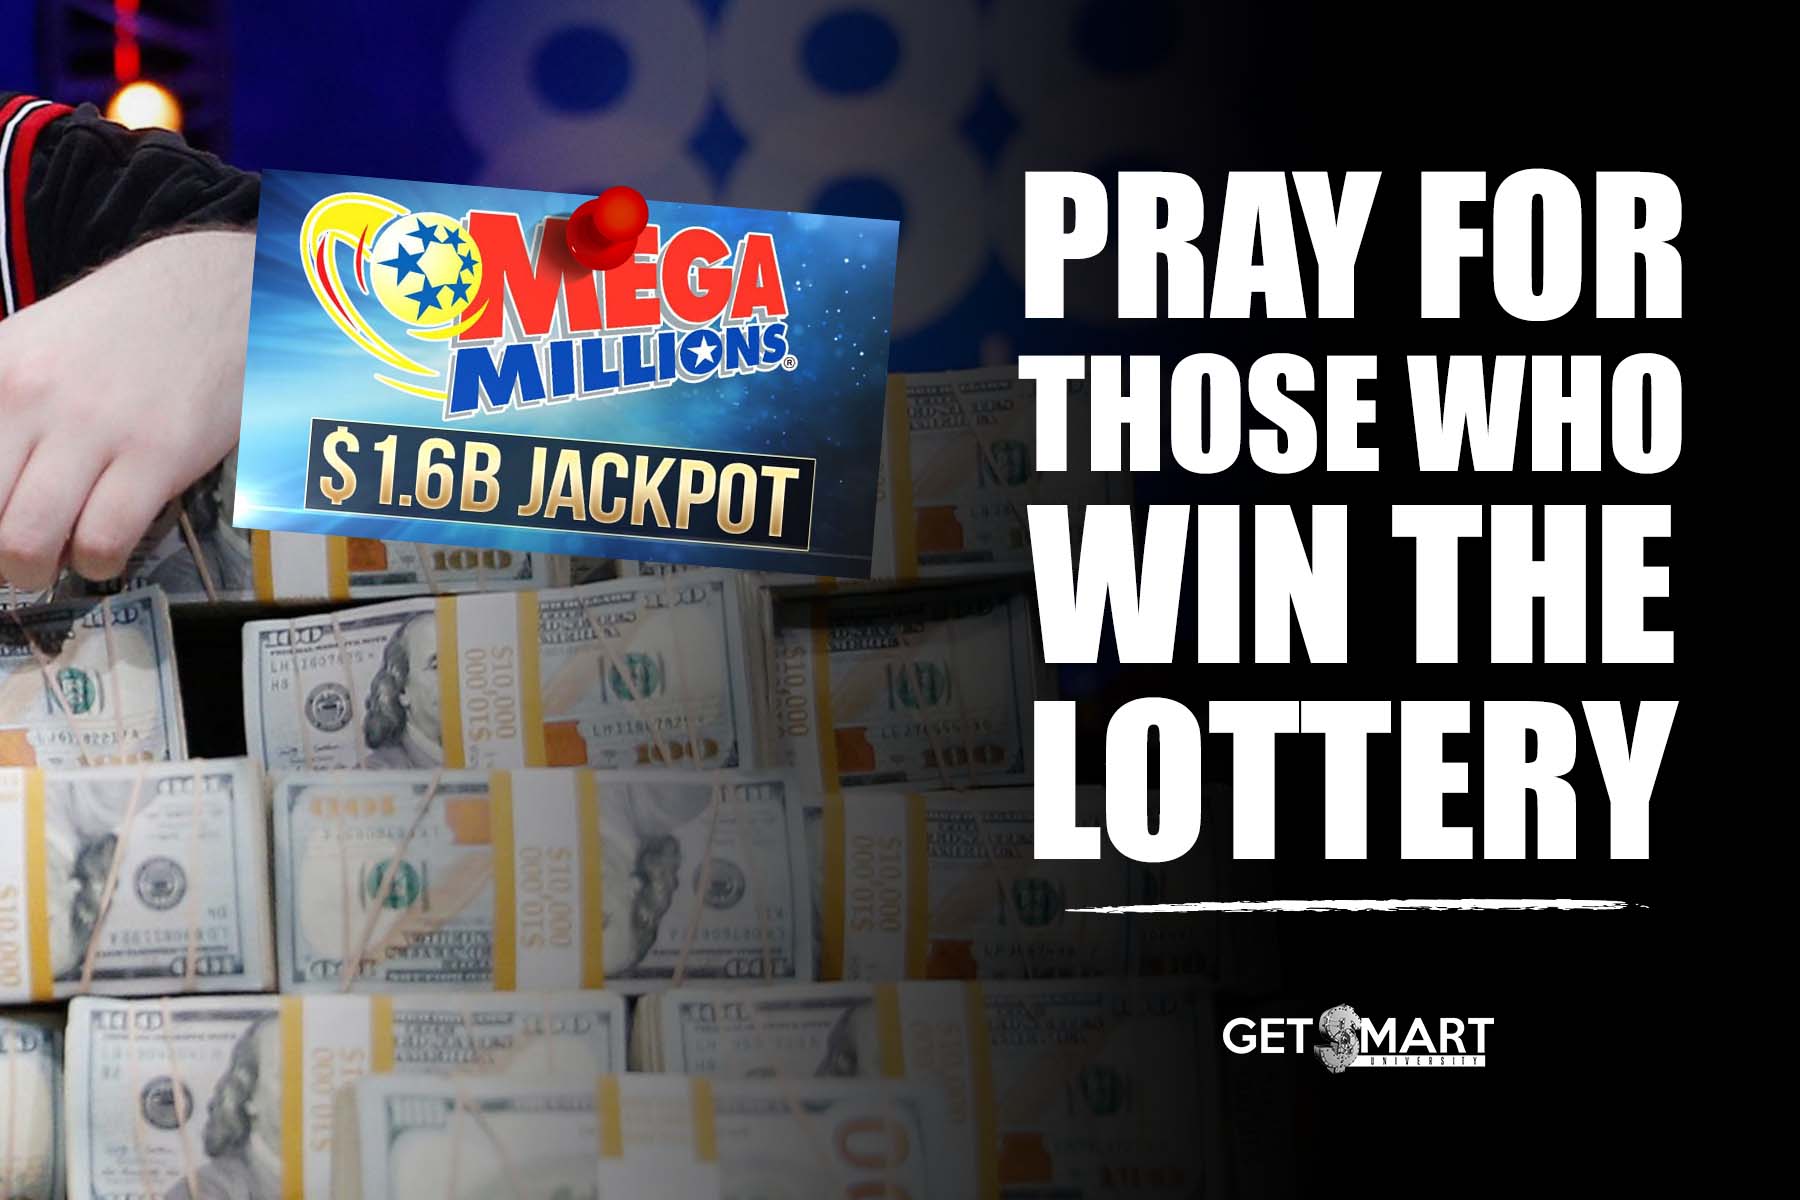 Pray for those who win the lottery…